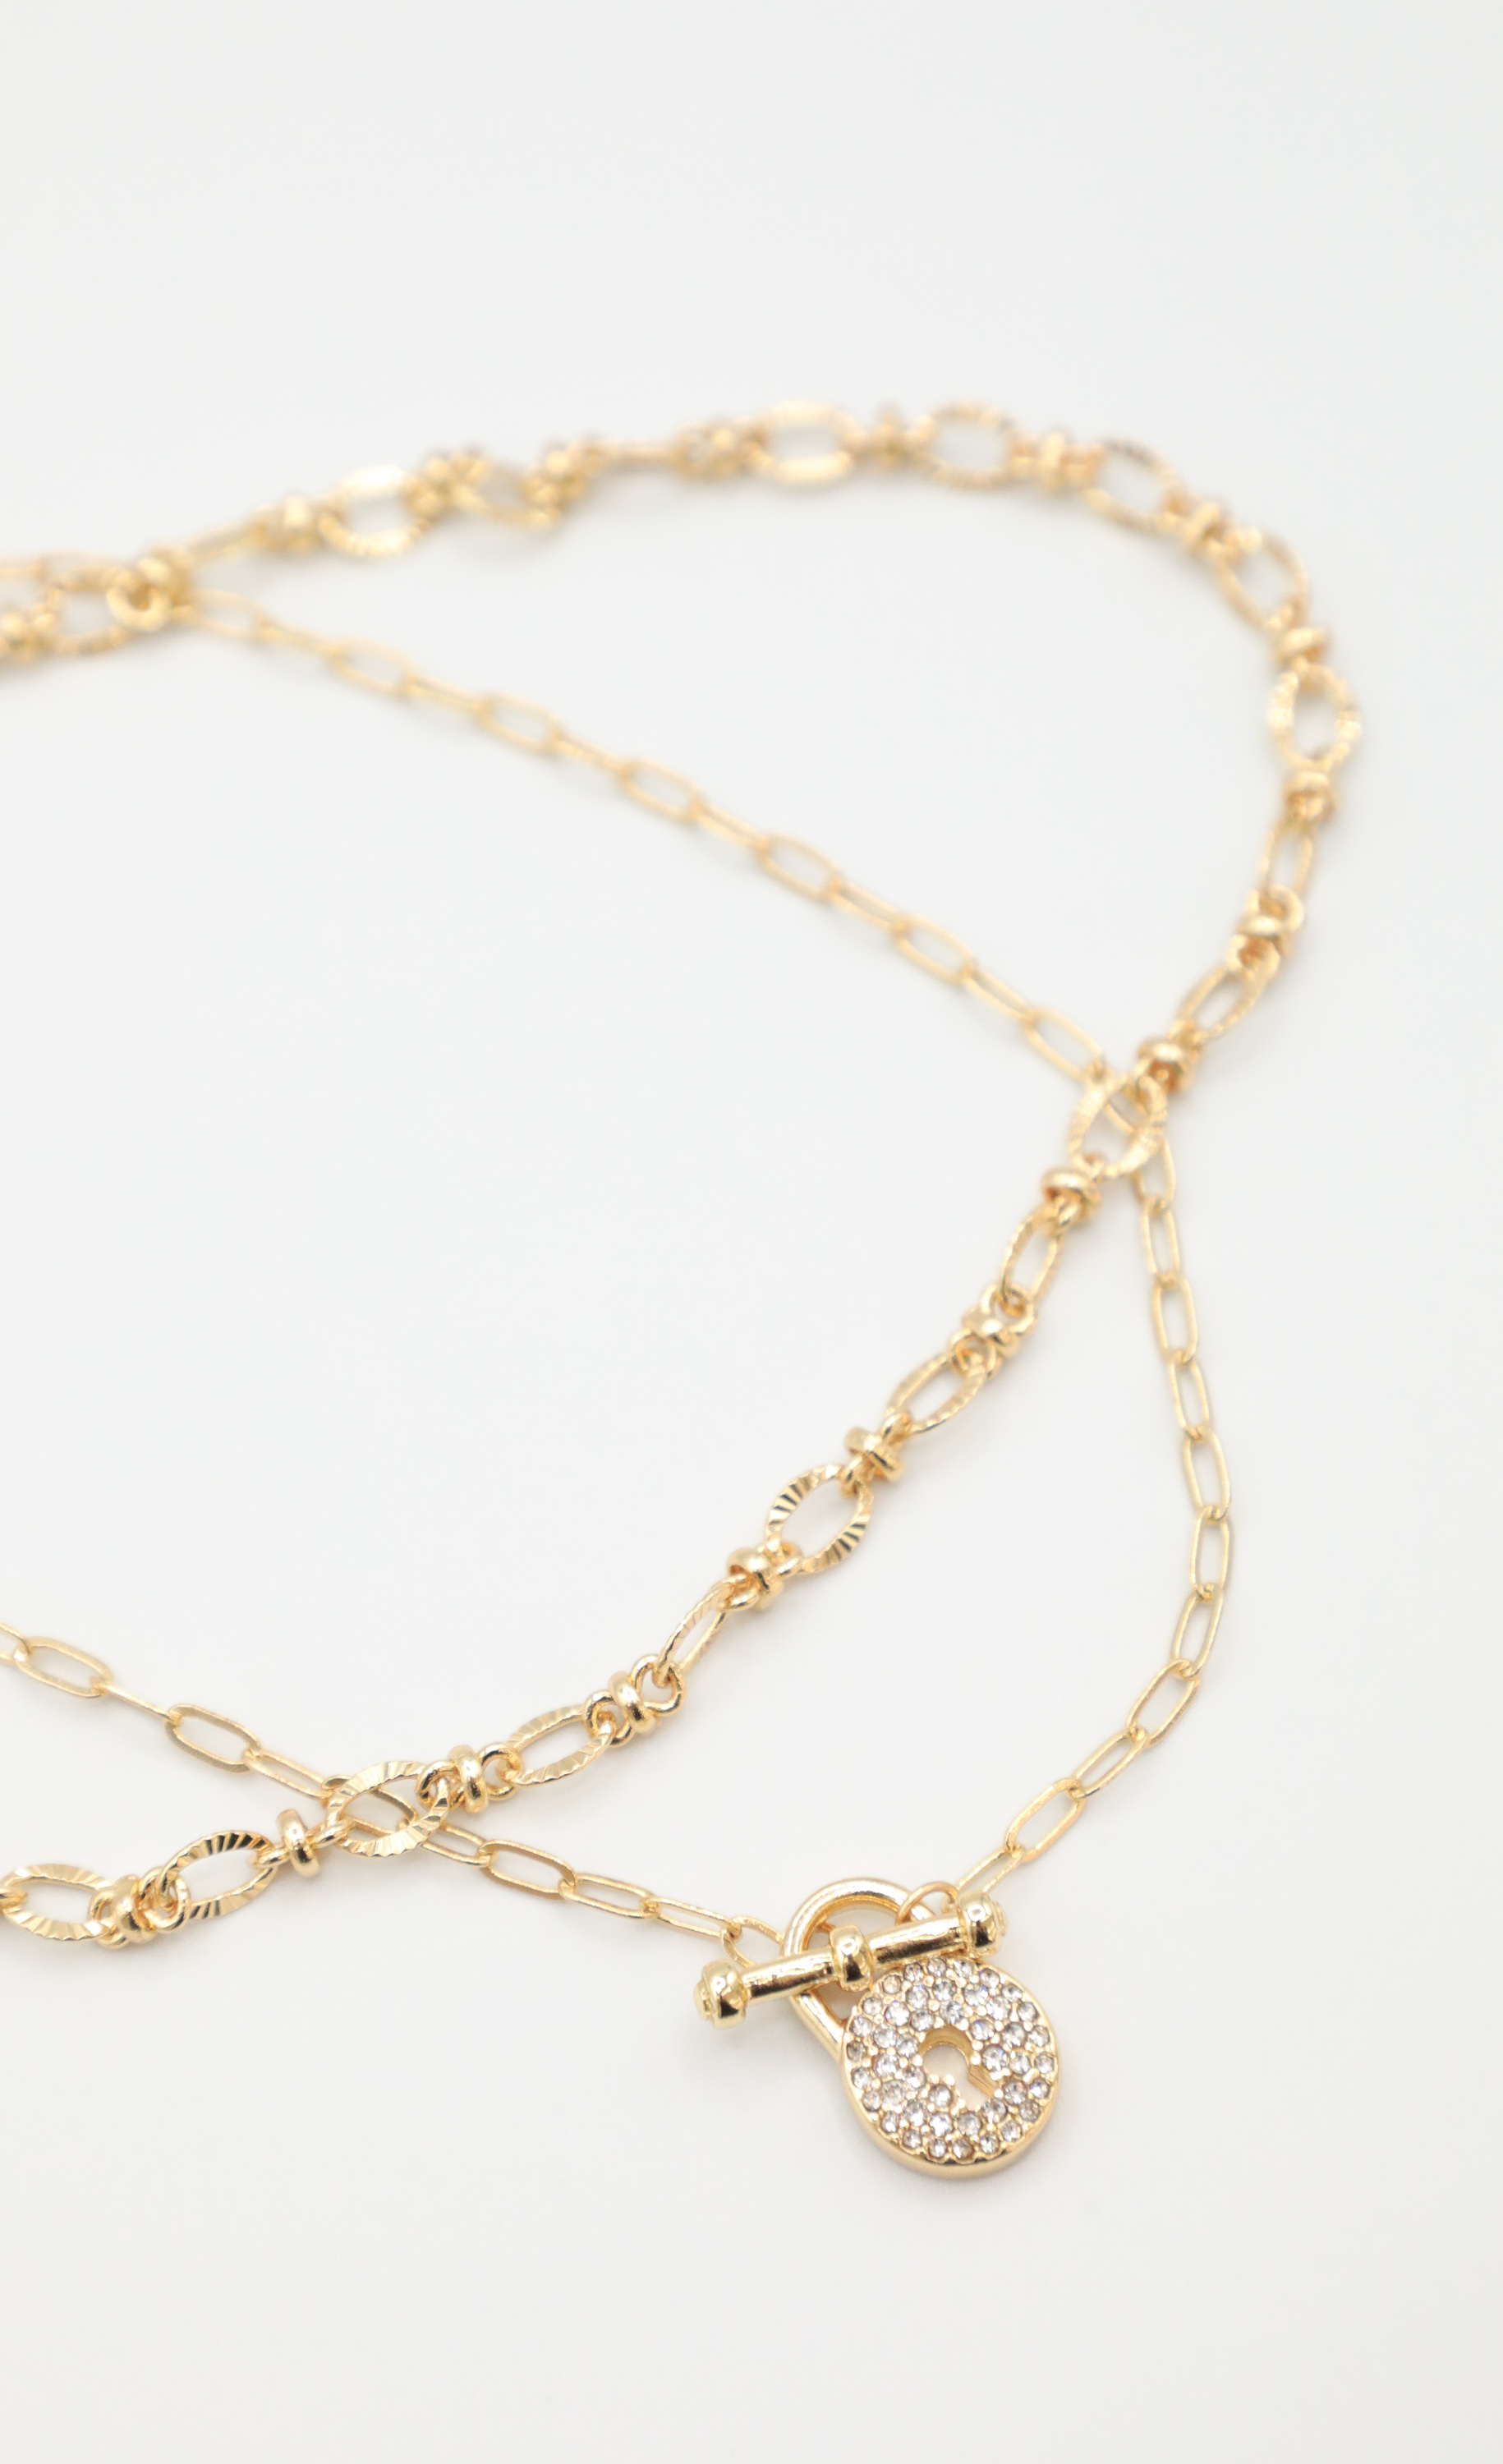 Throw The Key Away Necklace in Gold